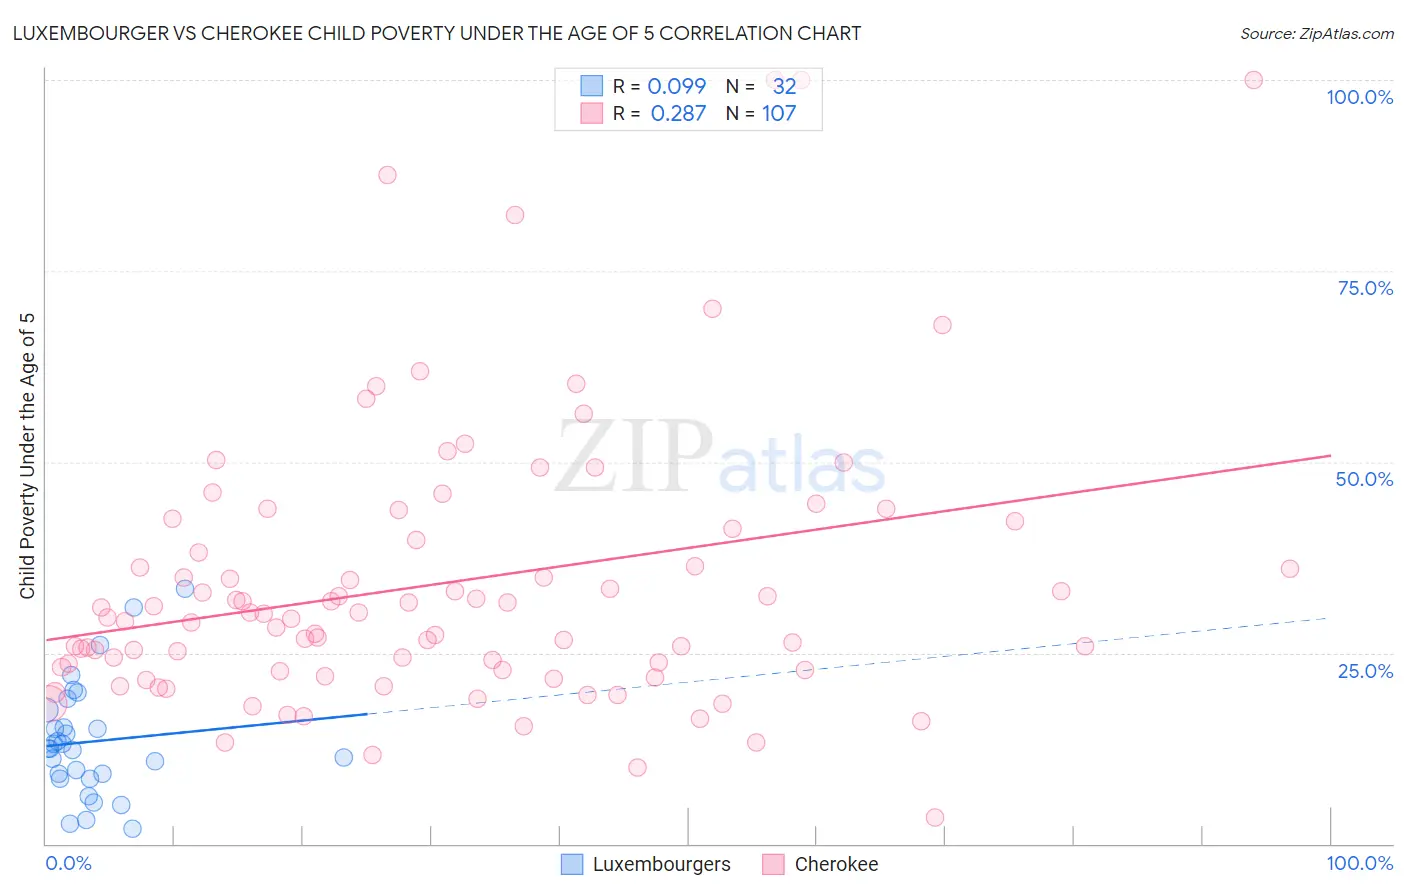 Luxembourger vs Cherokee Child Poverty Under the Age of 5